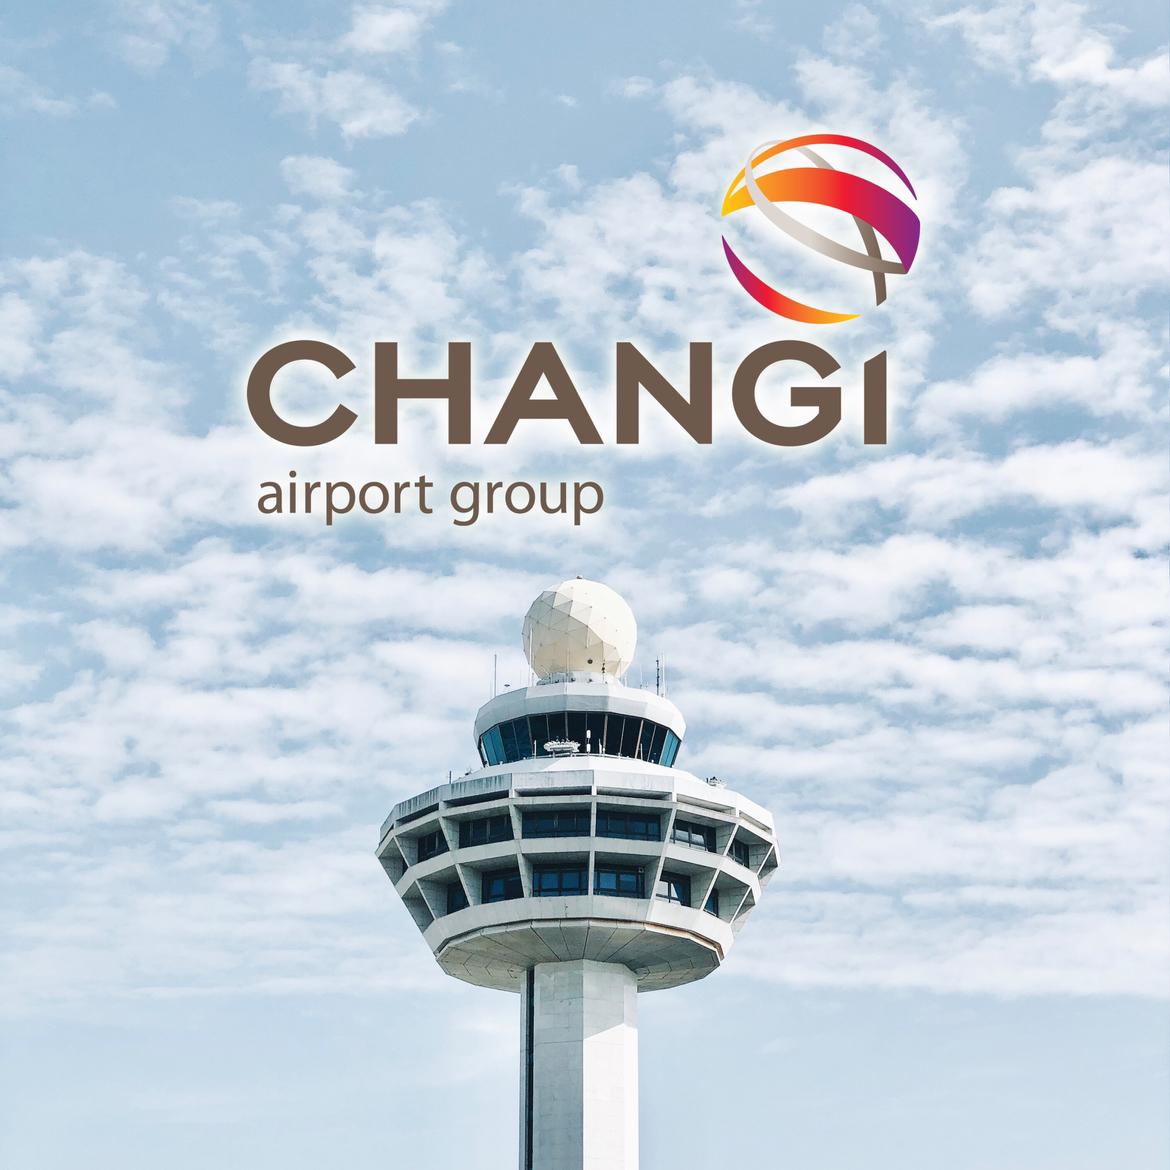 Changi Airport's images